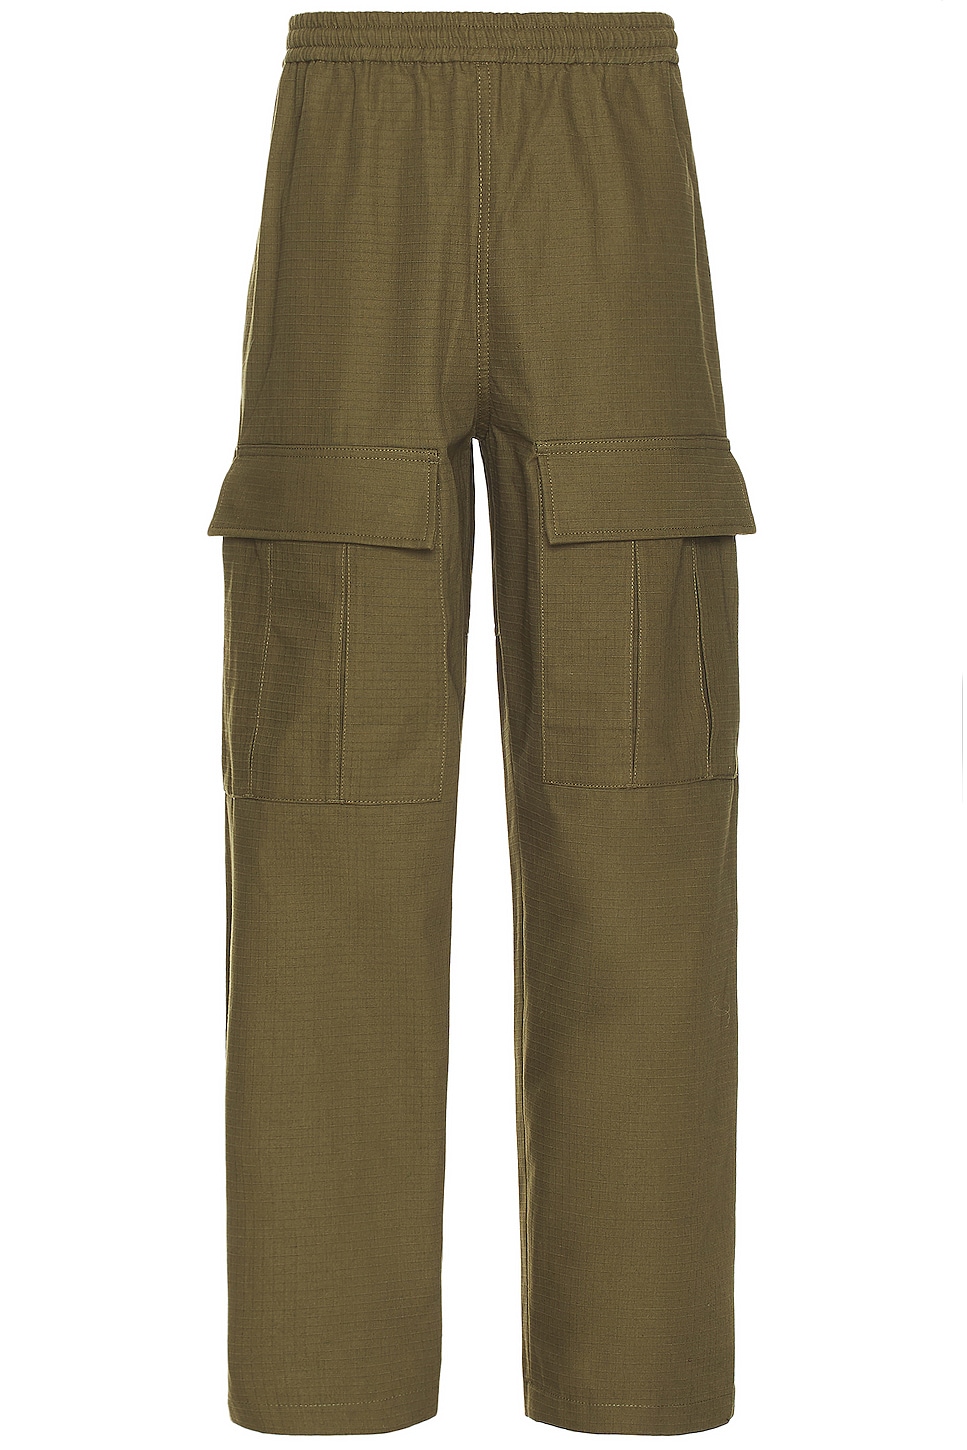 Image 1 of Acne Studios Ripstop Cargo in Olive Green